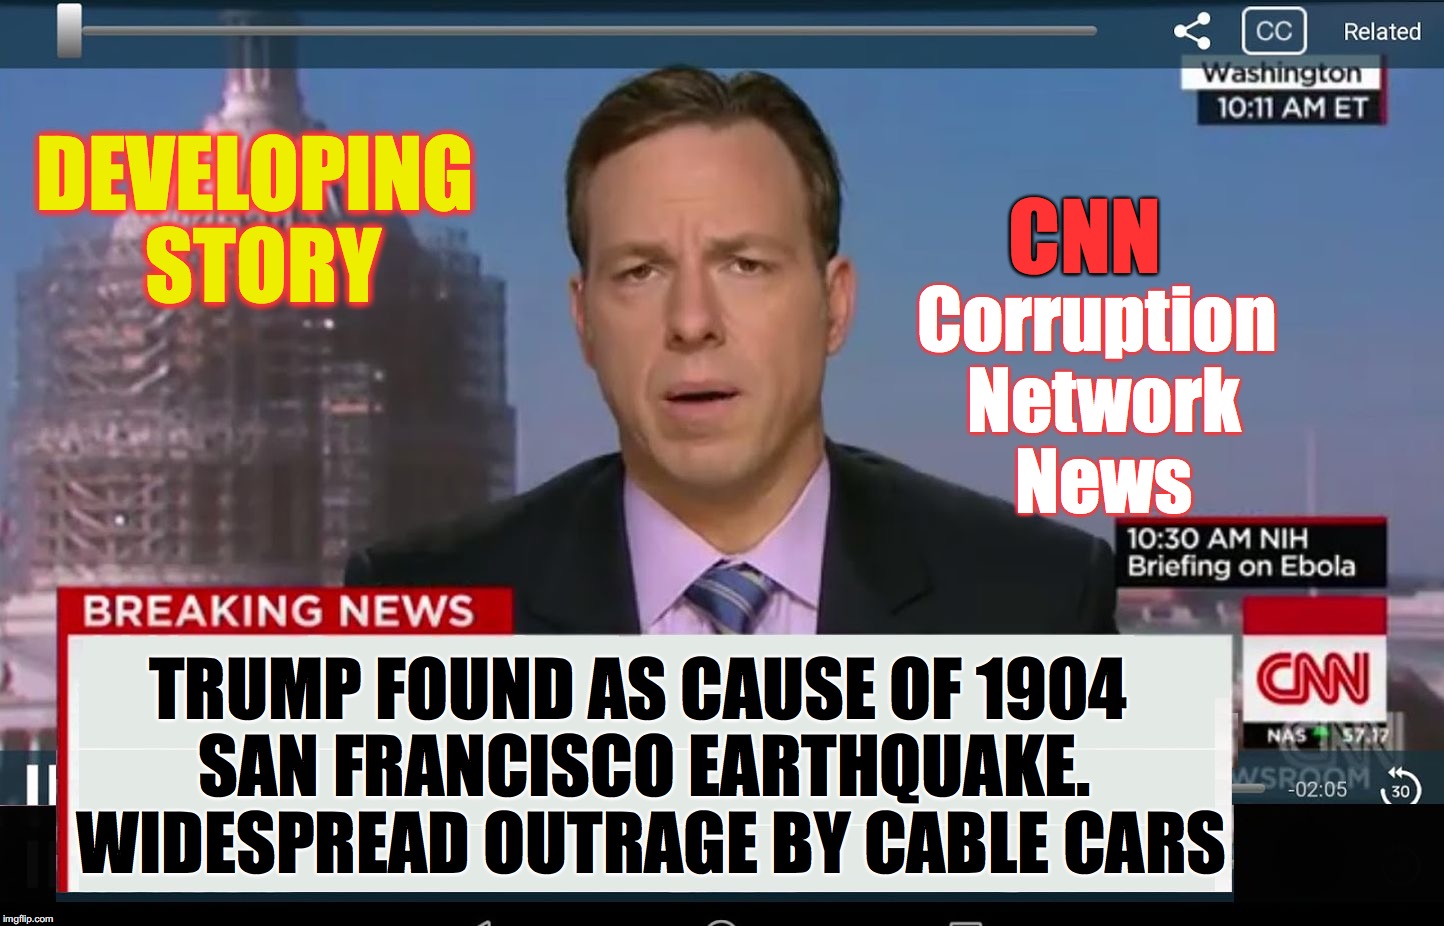 CNN Crazy News Network | CNN; DEVELOPING STORY; Corruption Network News; TRUMP FOUND AS CAUSE OF 1904 SAN FRANCISCO EARTHQUAKE.  WIDESPREAD OUTRAGE BY CABLE CARS | image tagged in cnn crazy news network | made w/ Imgflip meme maker